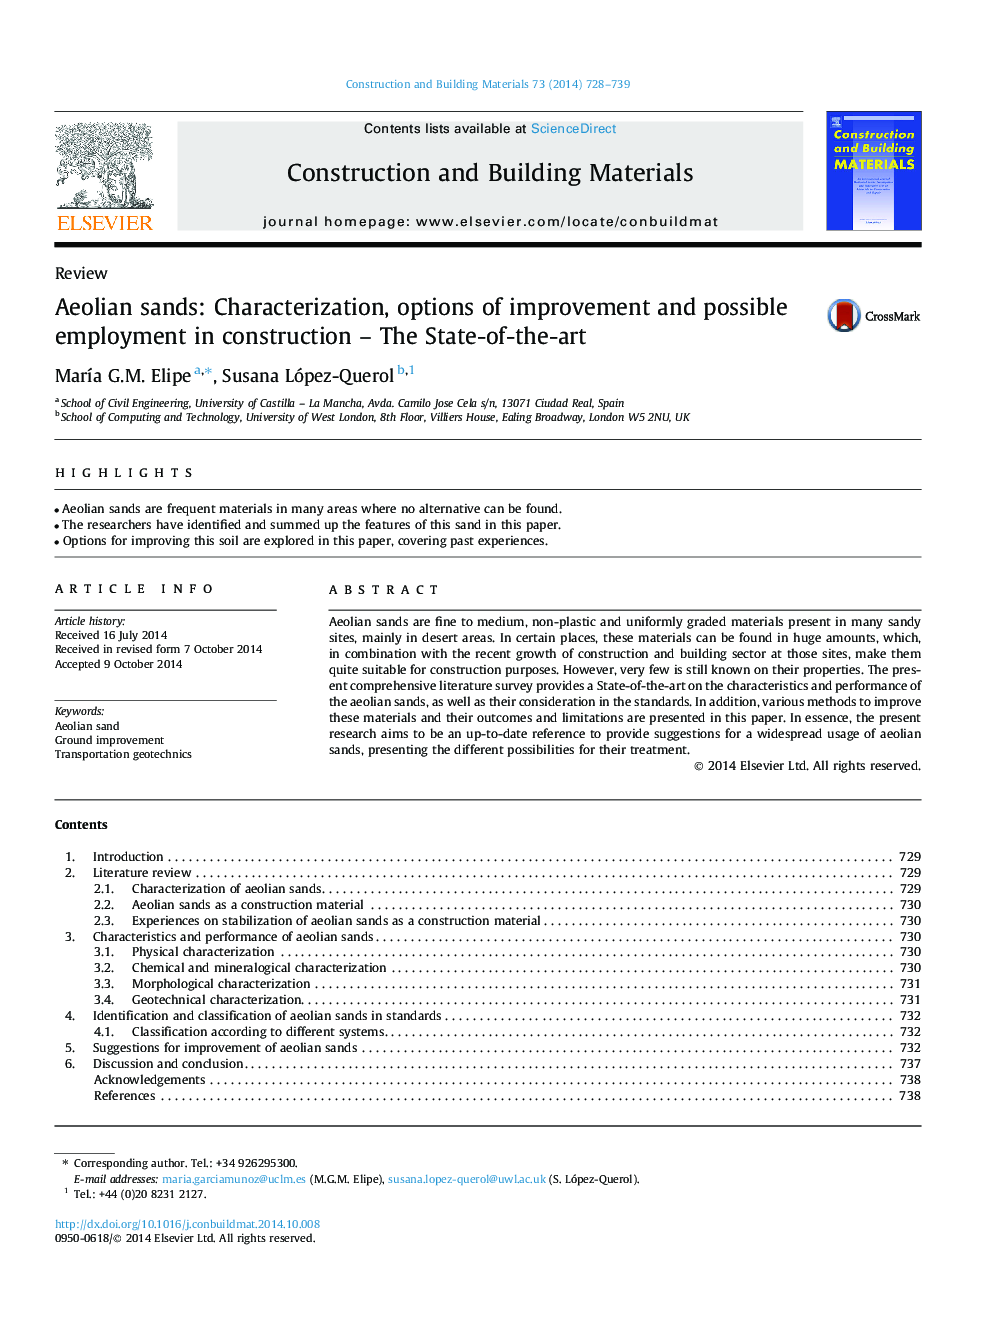 Aeolian sands: Characterization, options of improvement and possible employment in construction - The State-of-the-art